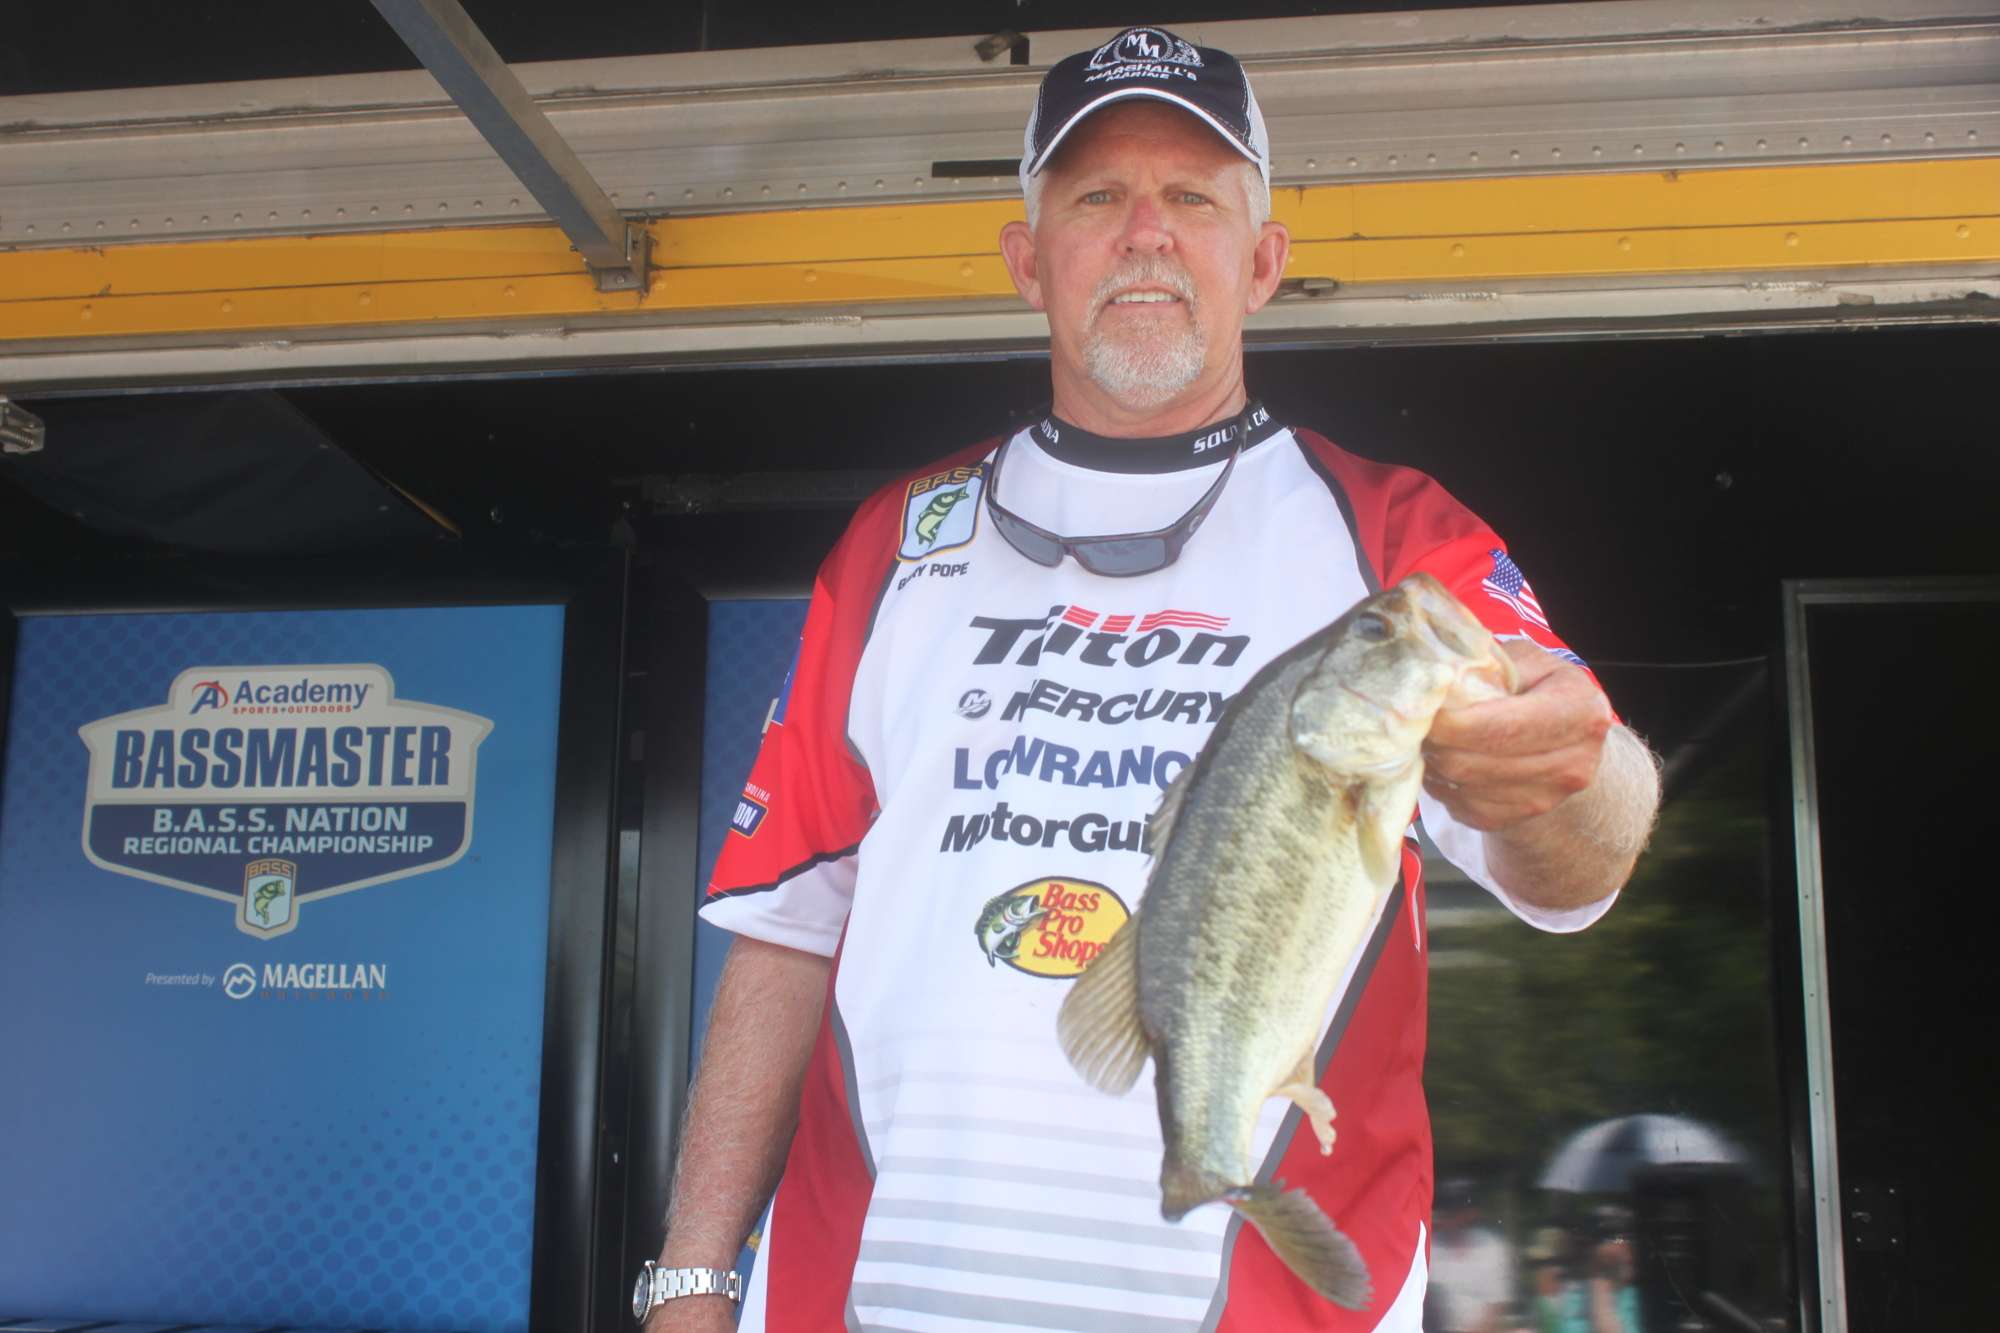 Hometown angler Gary Pope stayed atop the non-boater field, despite catching three bass on Thursday that weighed 3-9. He has a 13-13 total over two days, which is 1-1 better than Delawareâs Jimmy Myers.